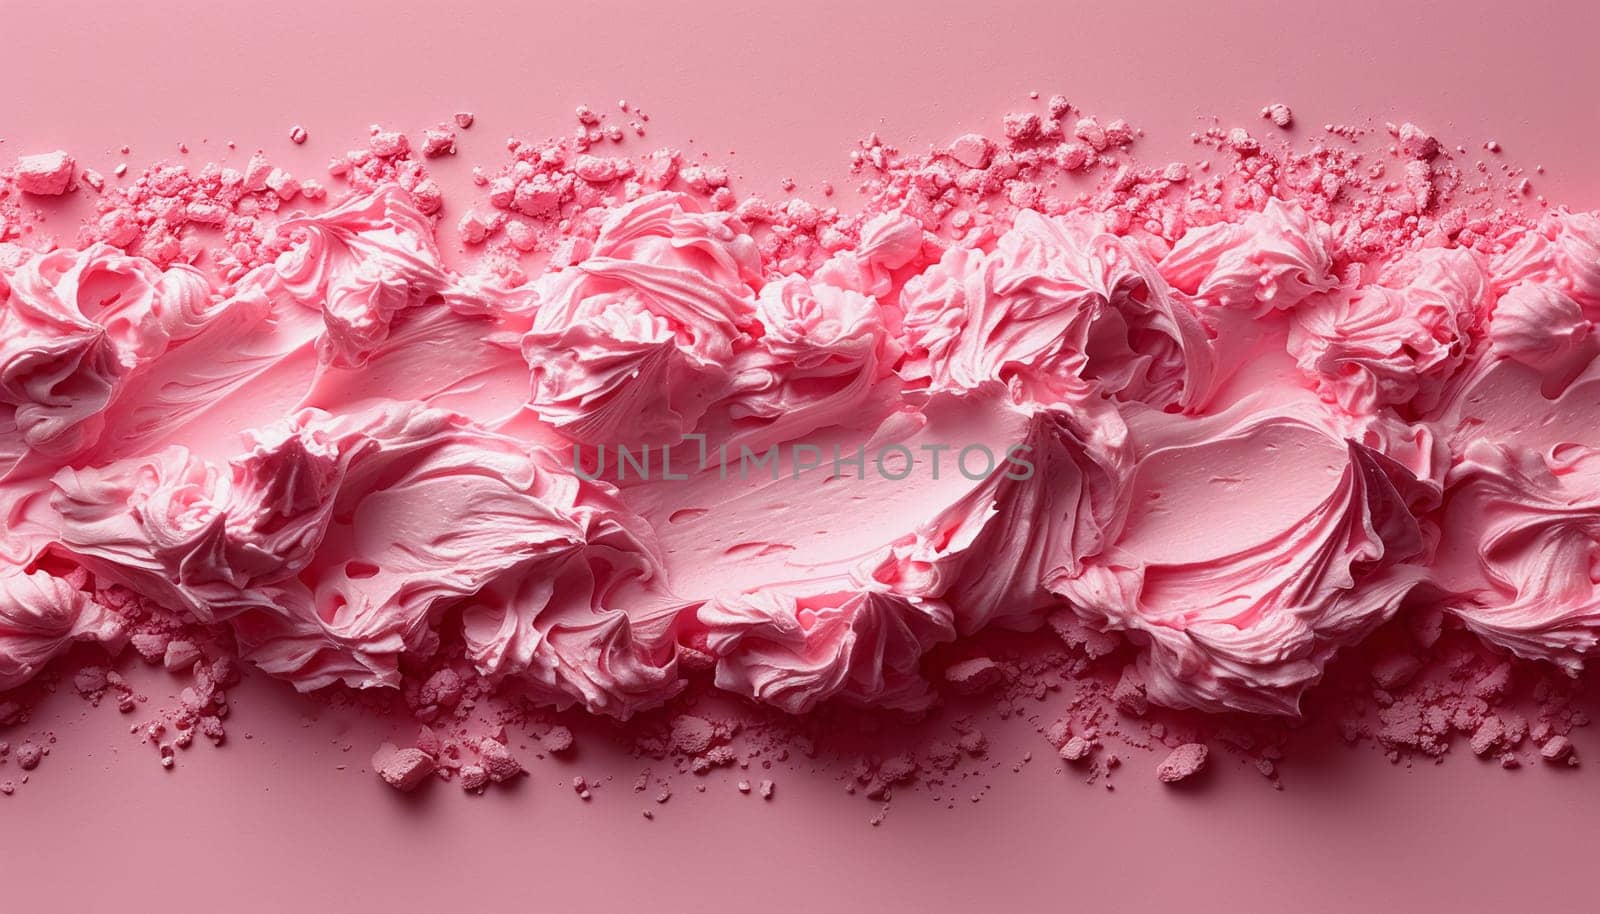 A smear of cosmetics background by Nadtochiy